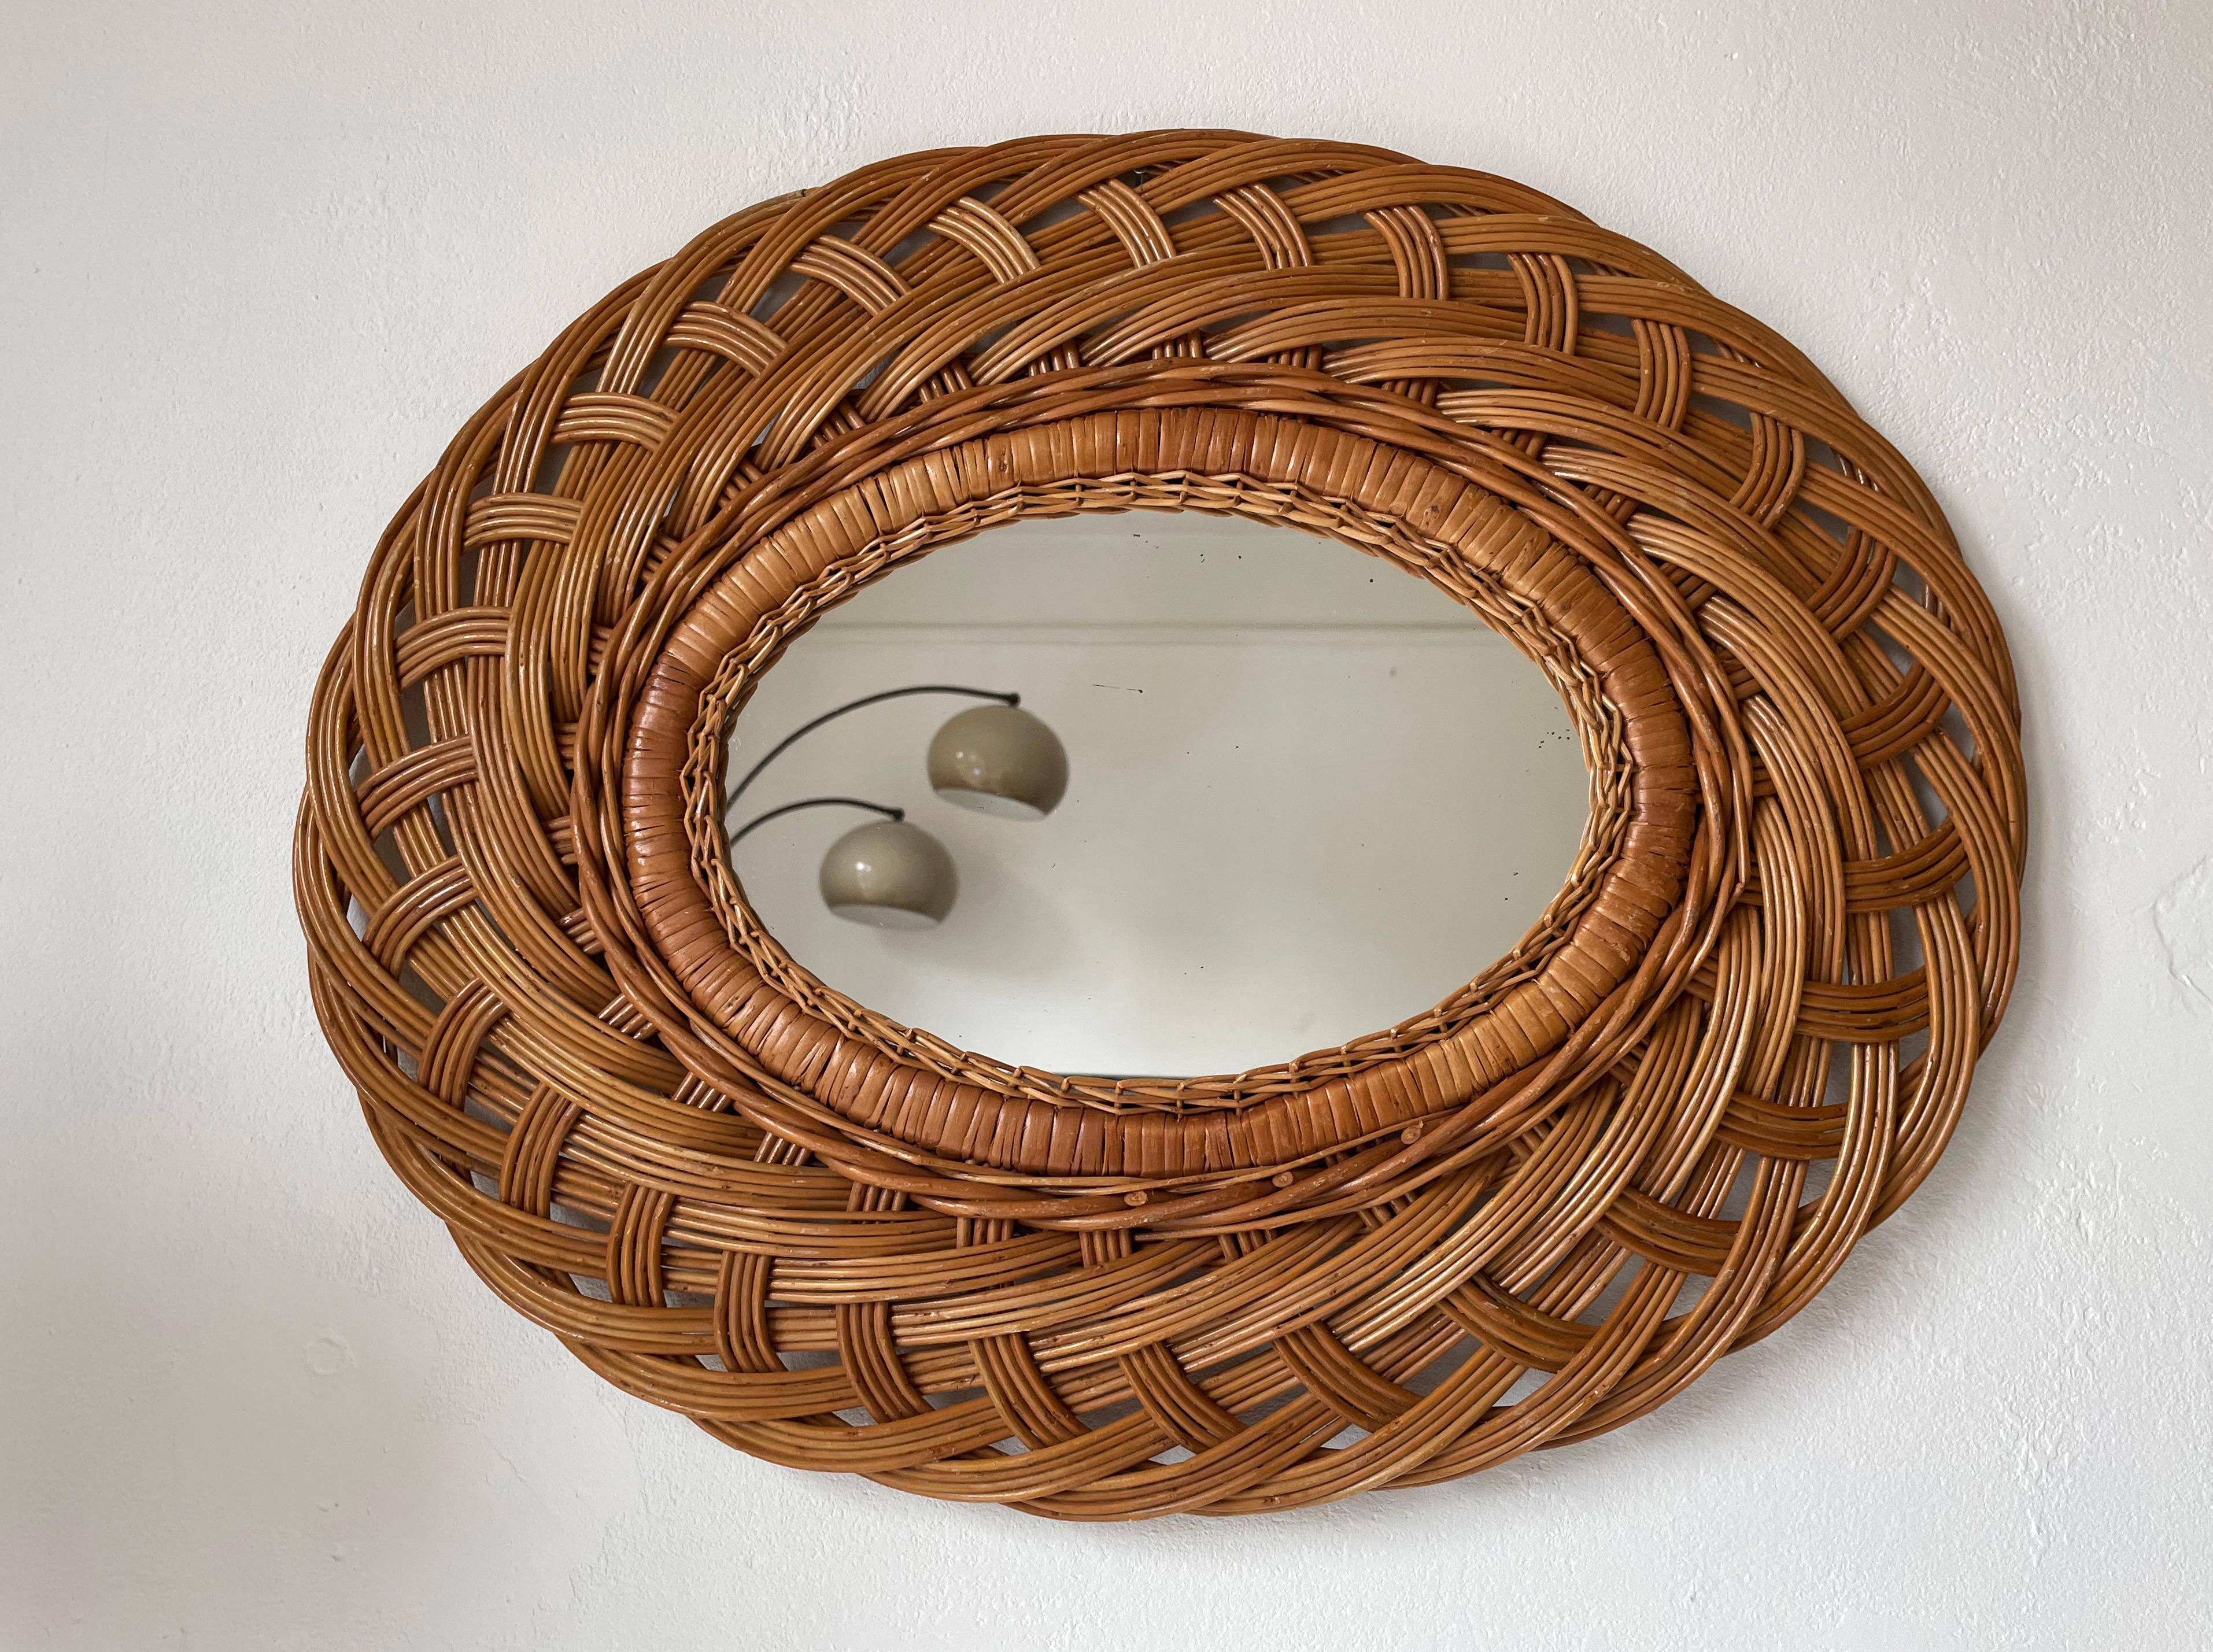 French Riviera 1950s oval hand woven and braided rattan mirror. Large wicker decorated frame with soft organic shapes that allows for hanging the mirror vertically or horisontally to add to a Bohemian Mediterranean style. Beautiful vintage